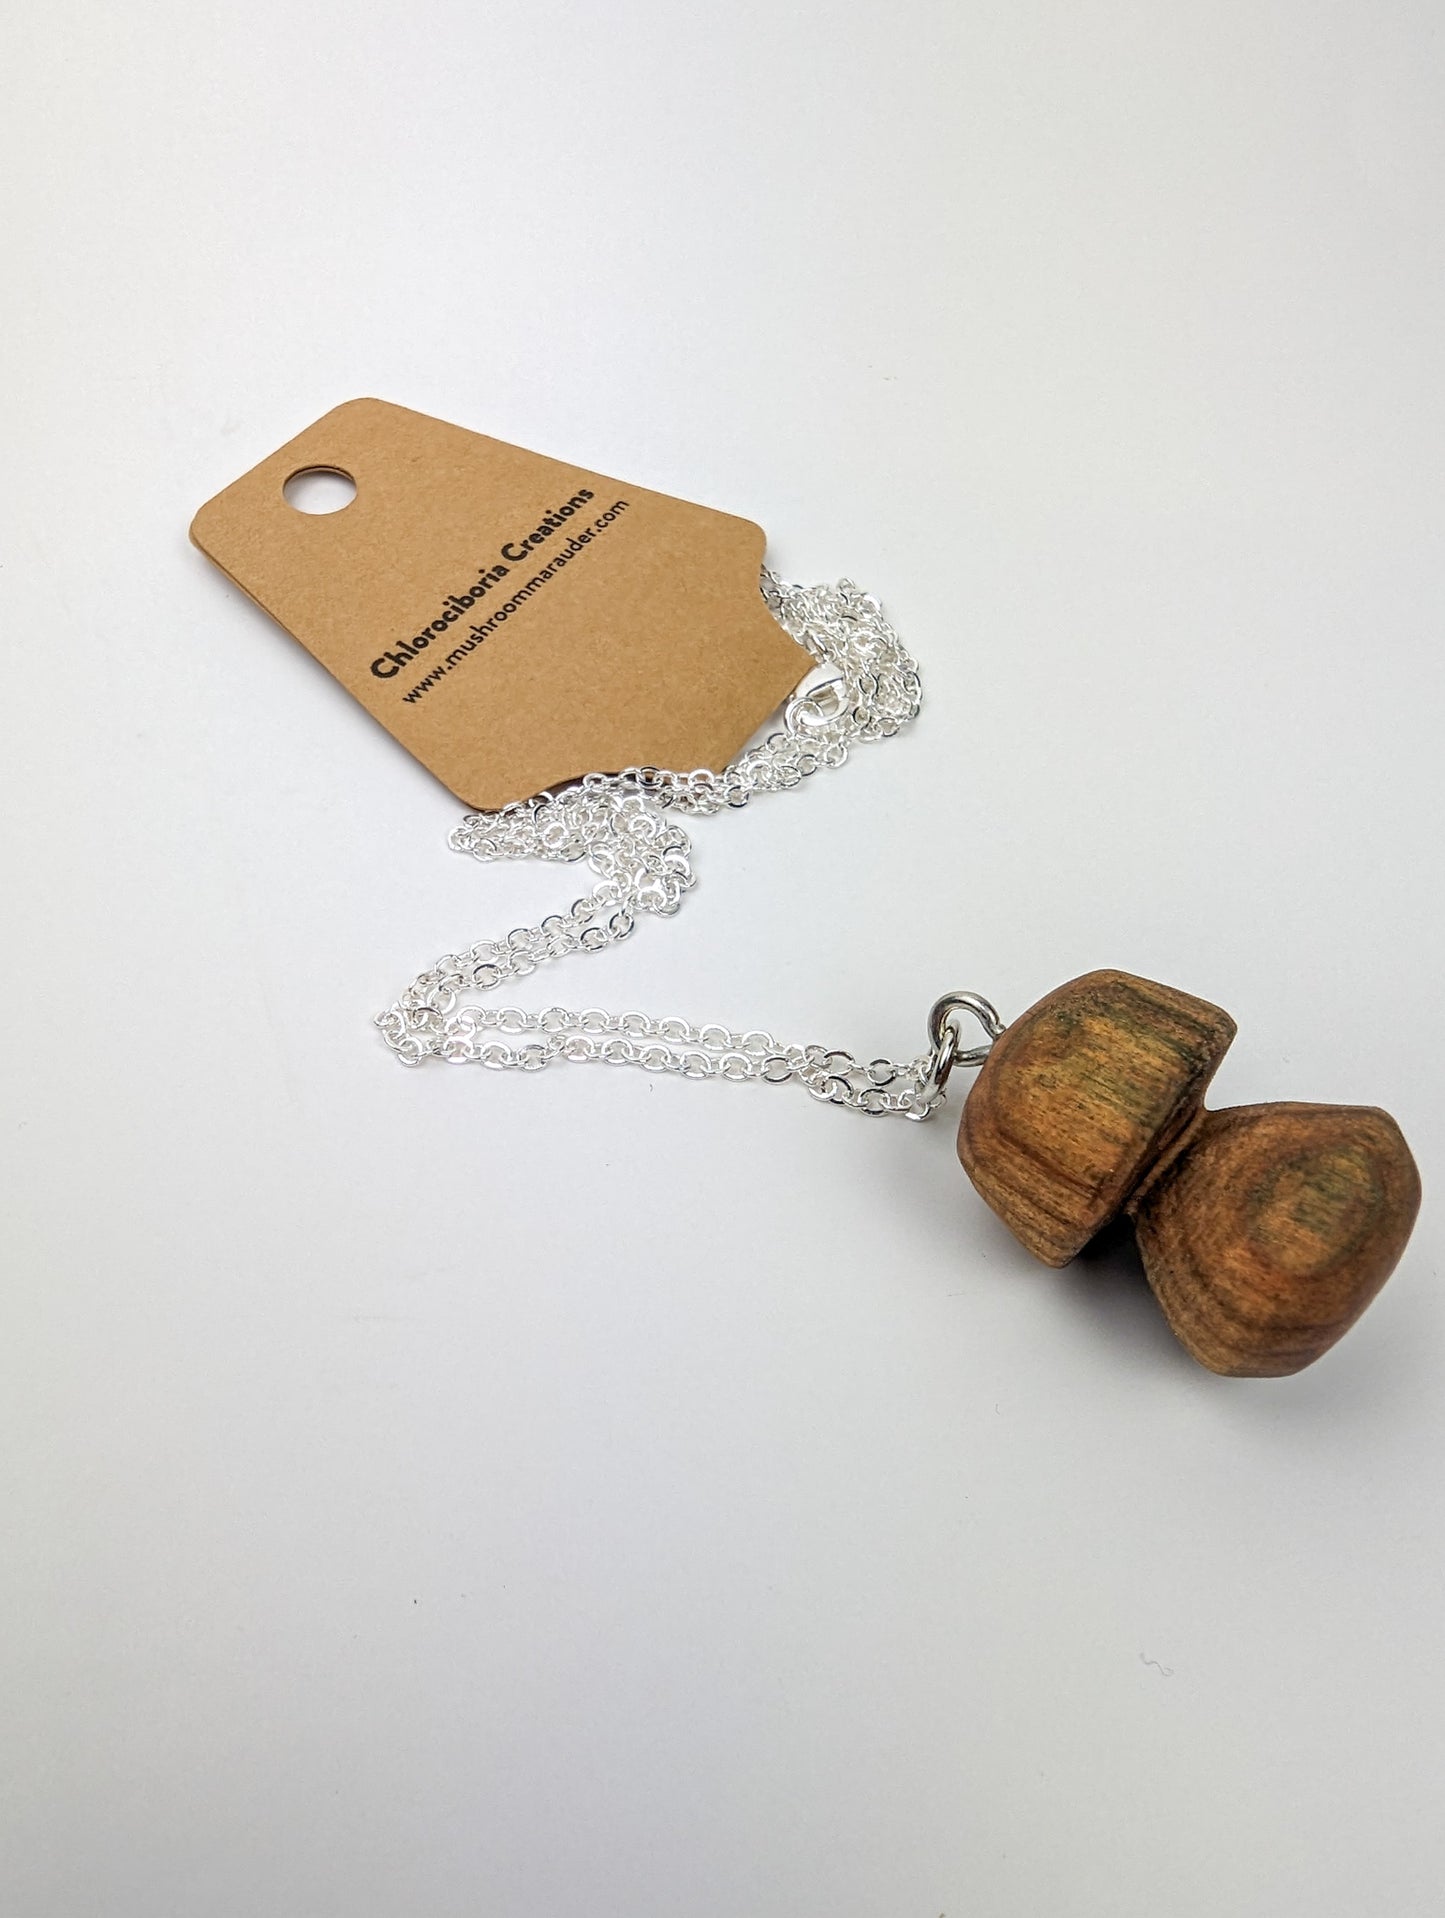 Naturally Fungus-Stained Wooden Pendant | Porcini Mushroom #3